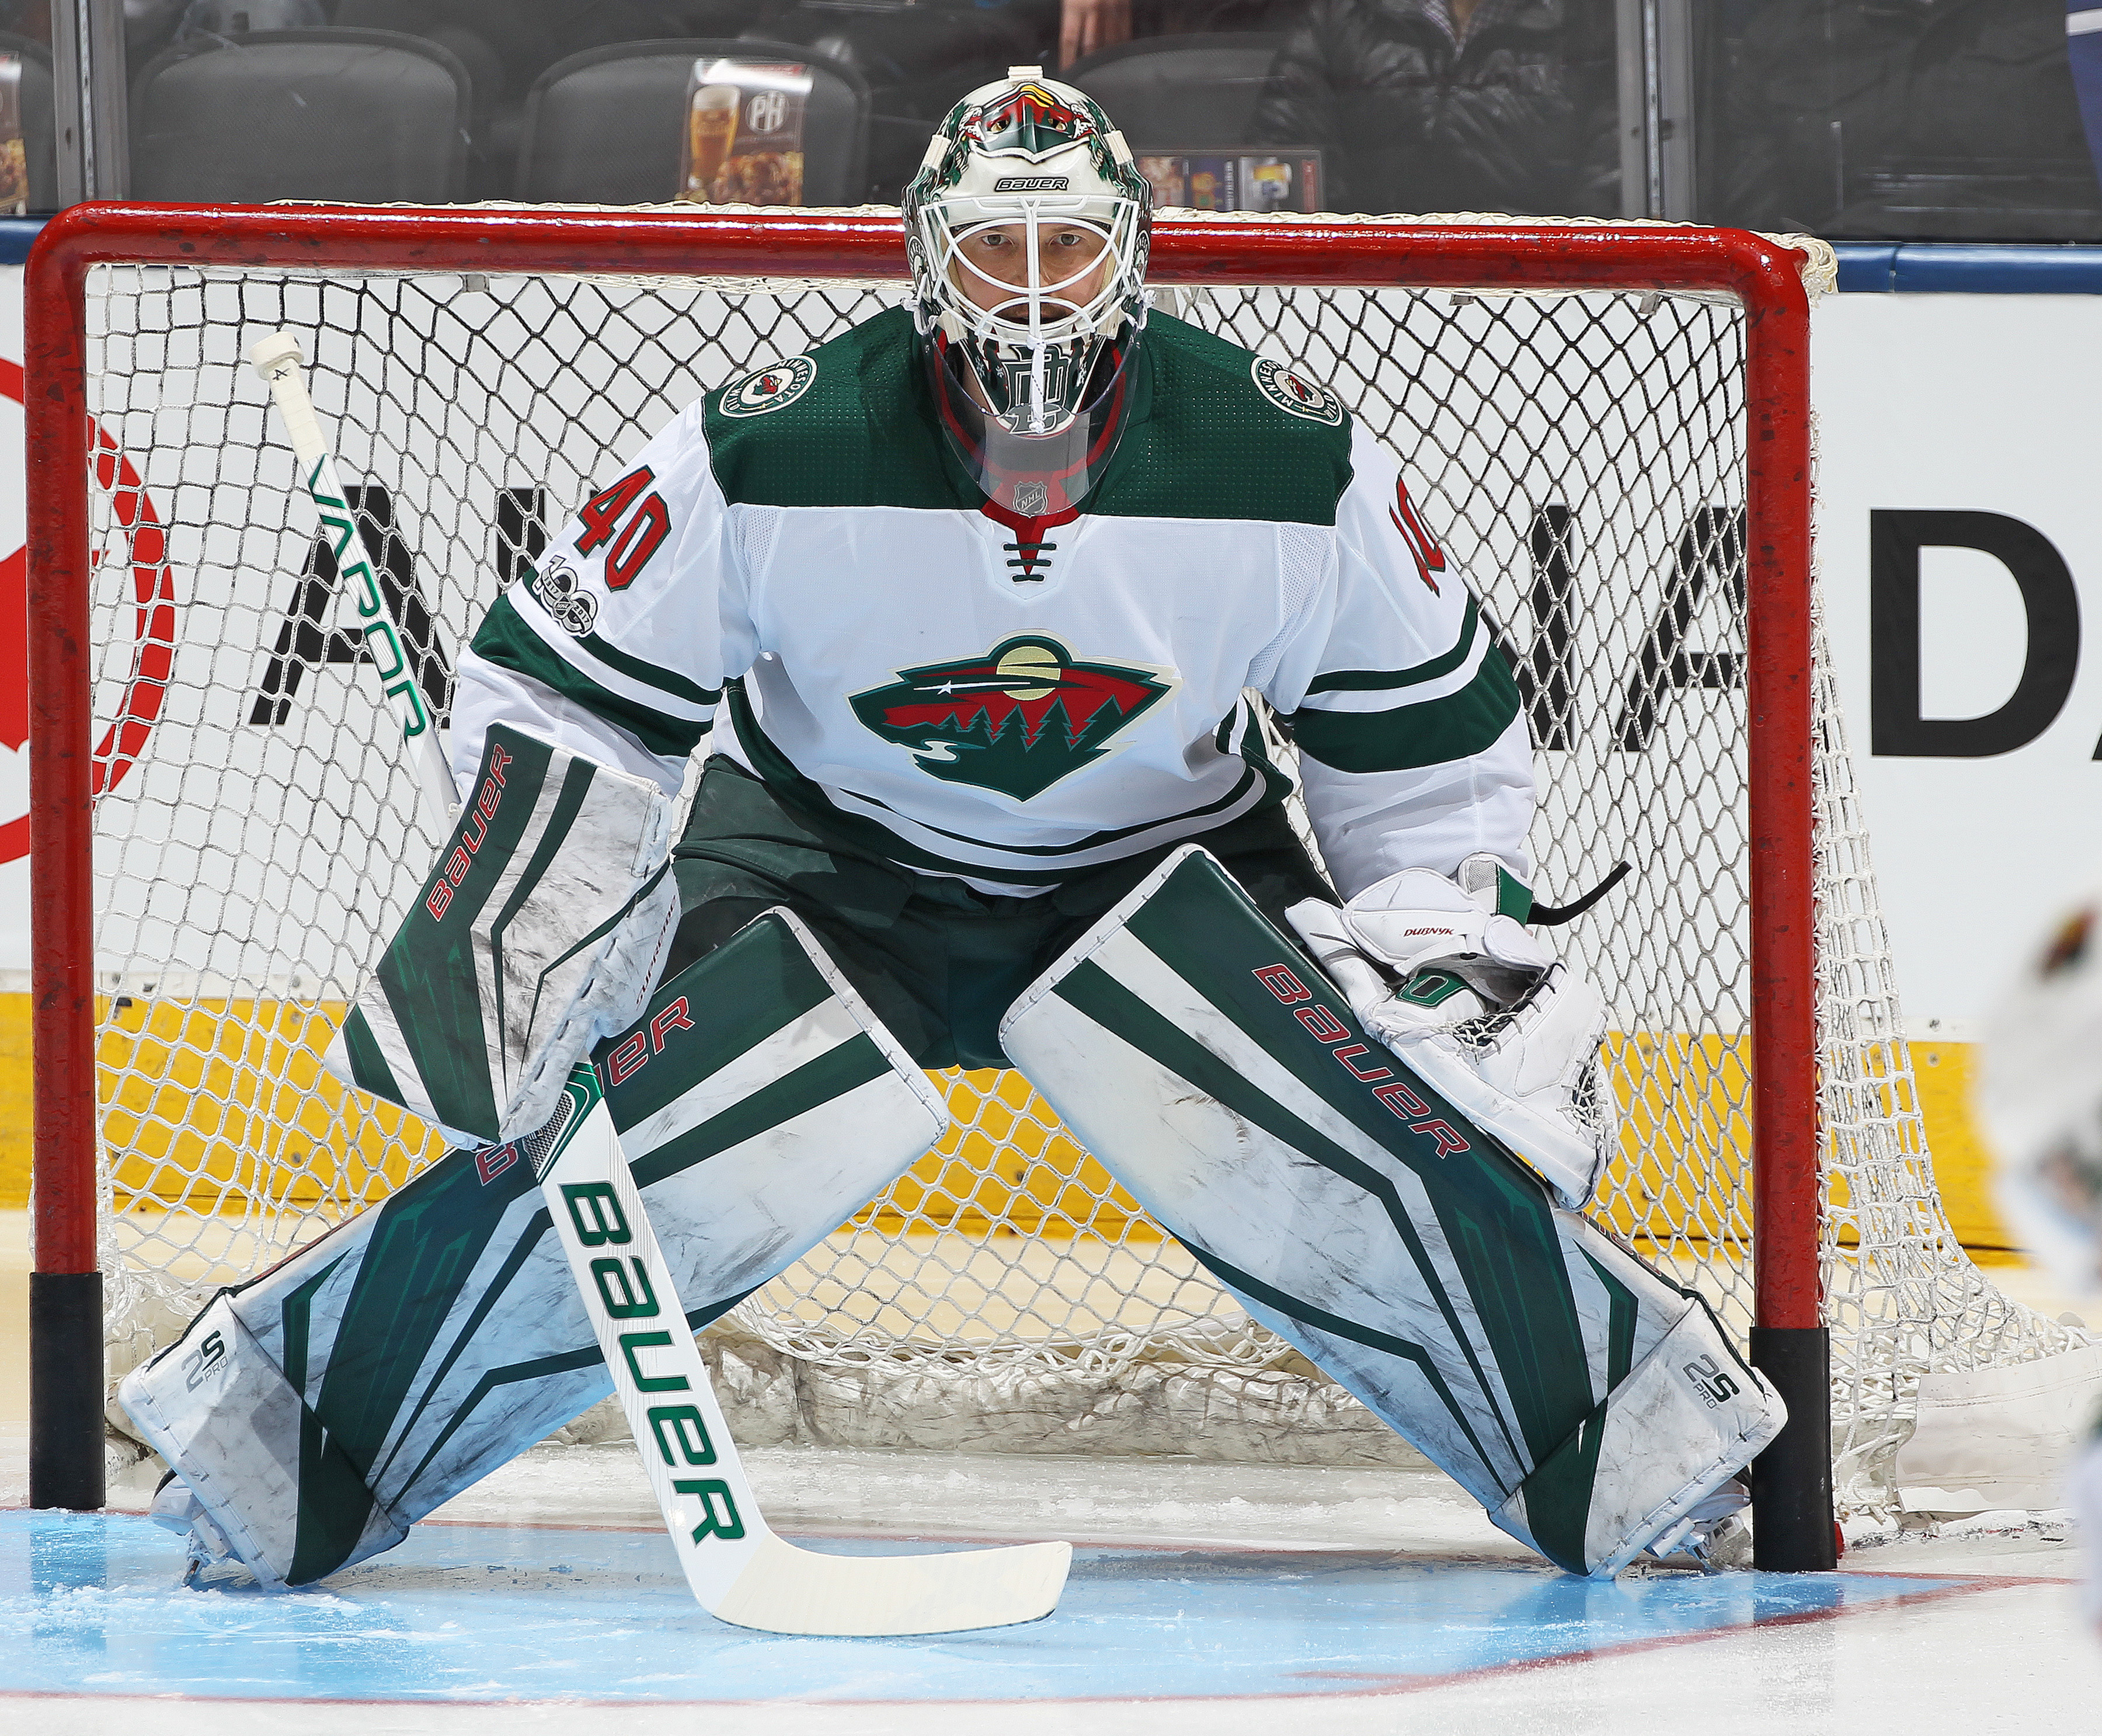 Minnesota Wild on X: #mnwild has agreed to terms with Bruce